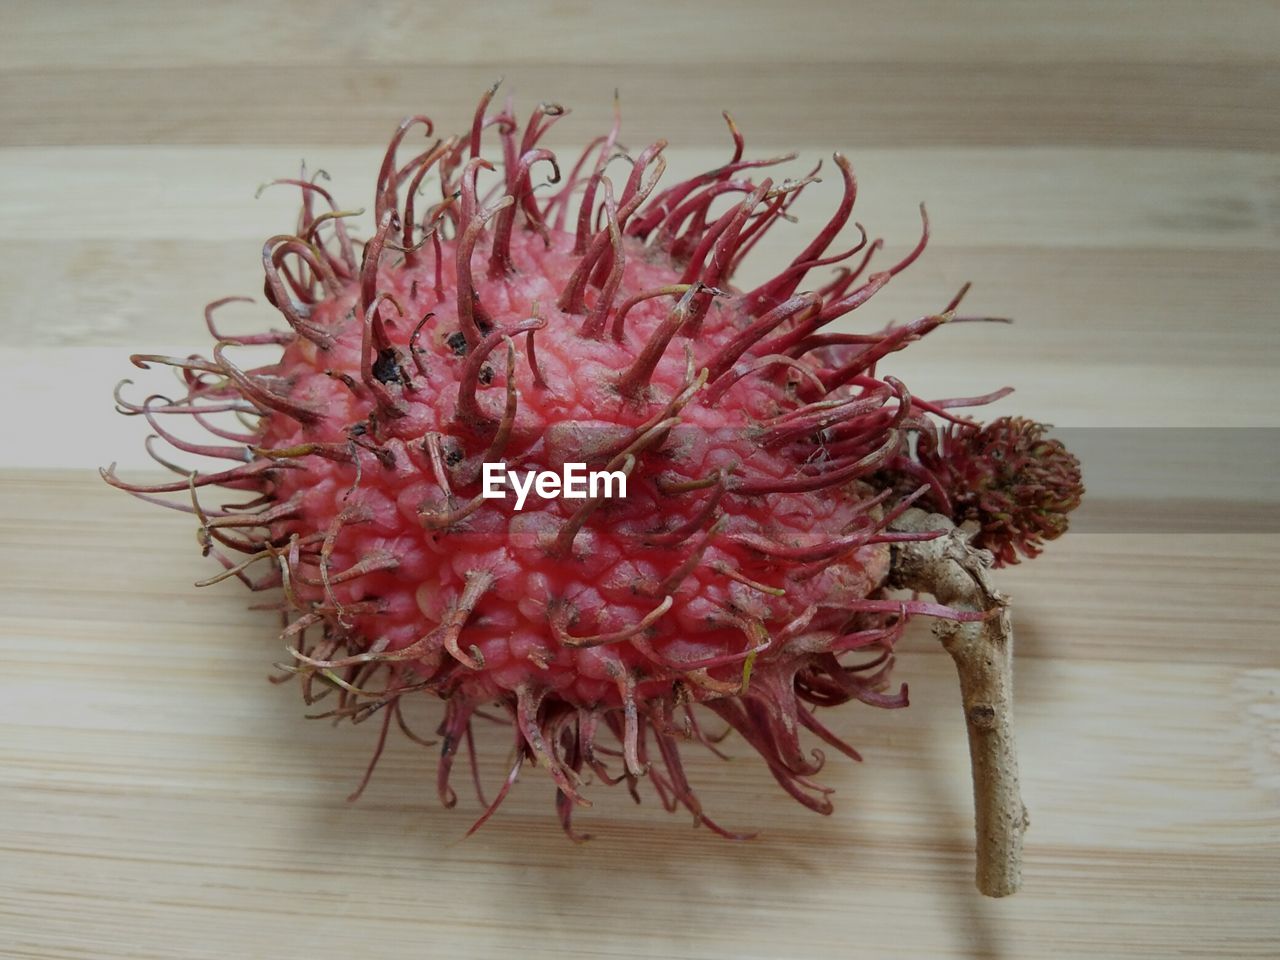 The red rambutans on the board